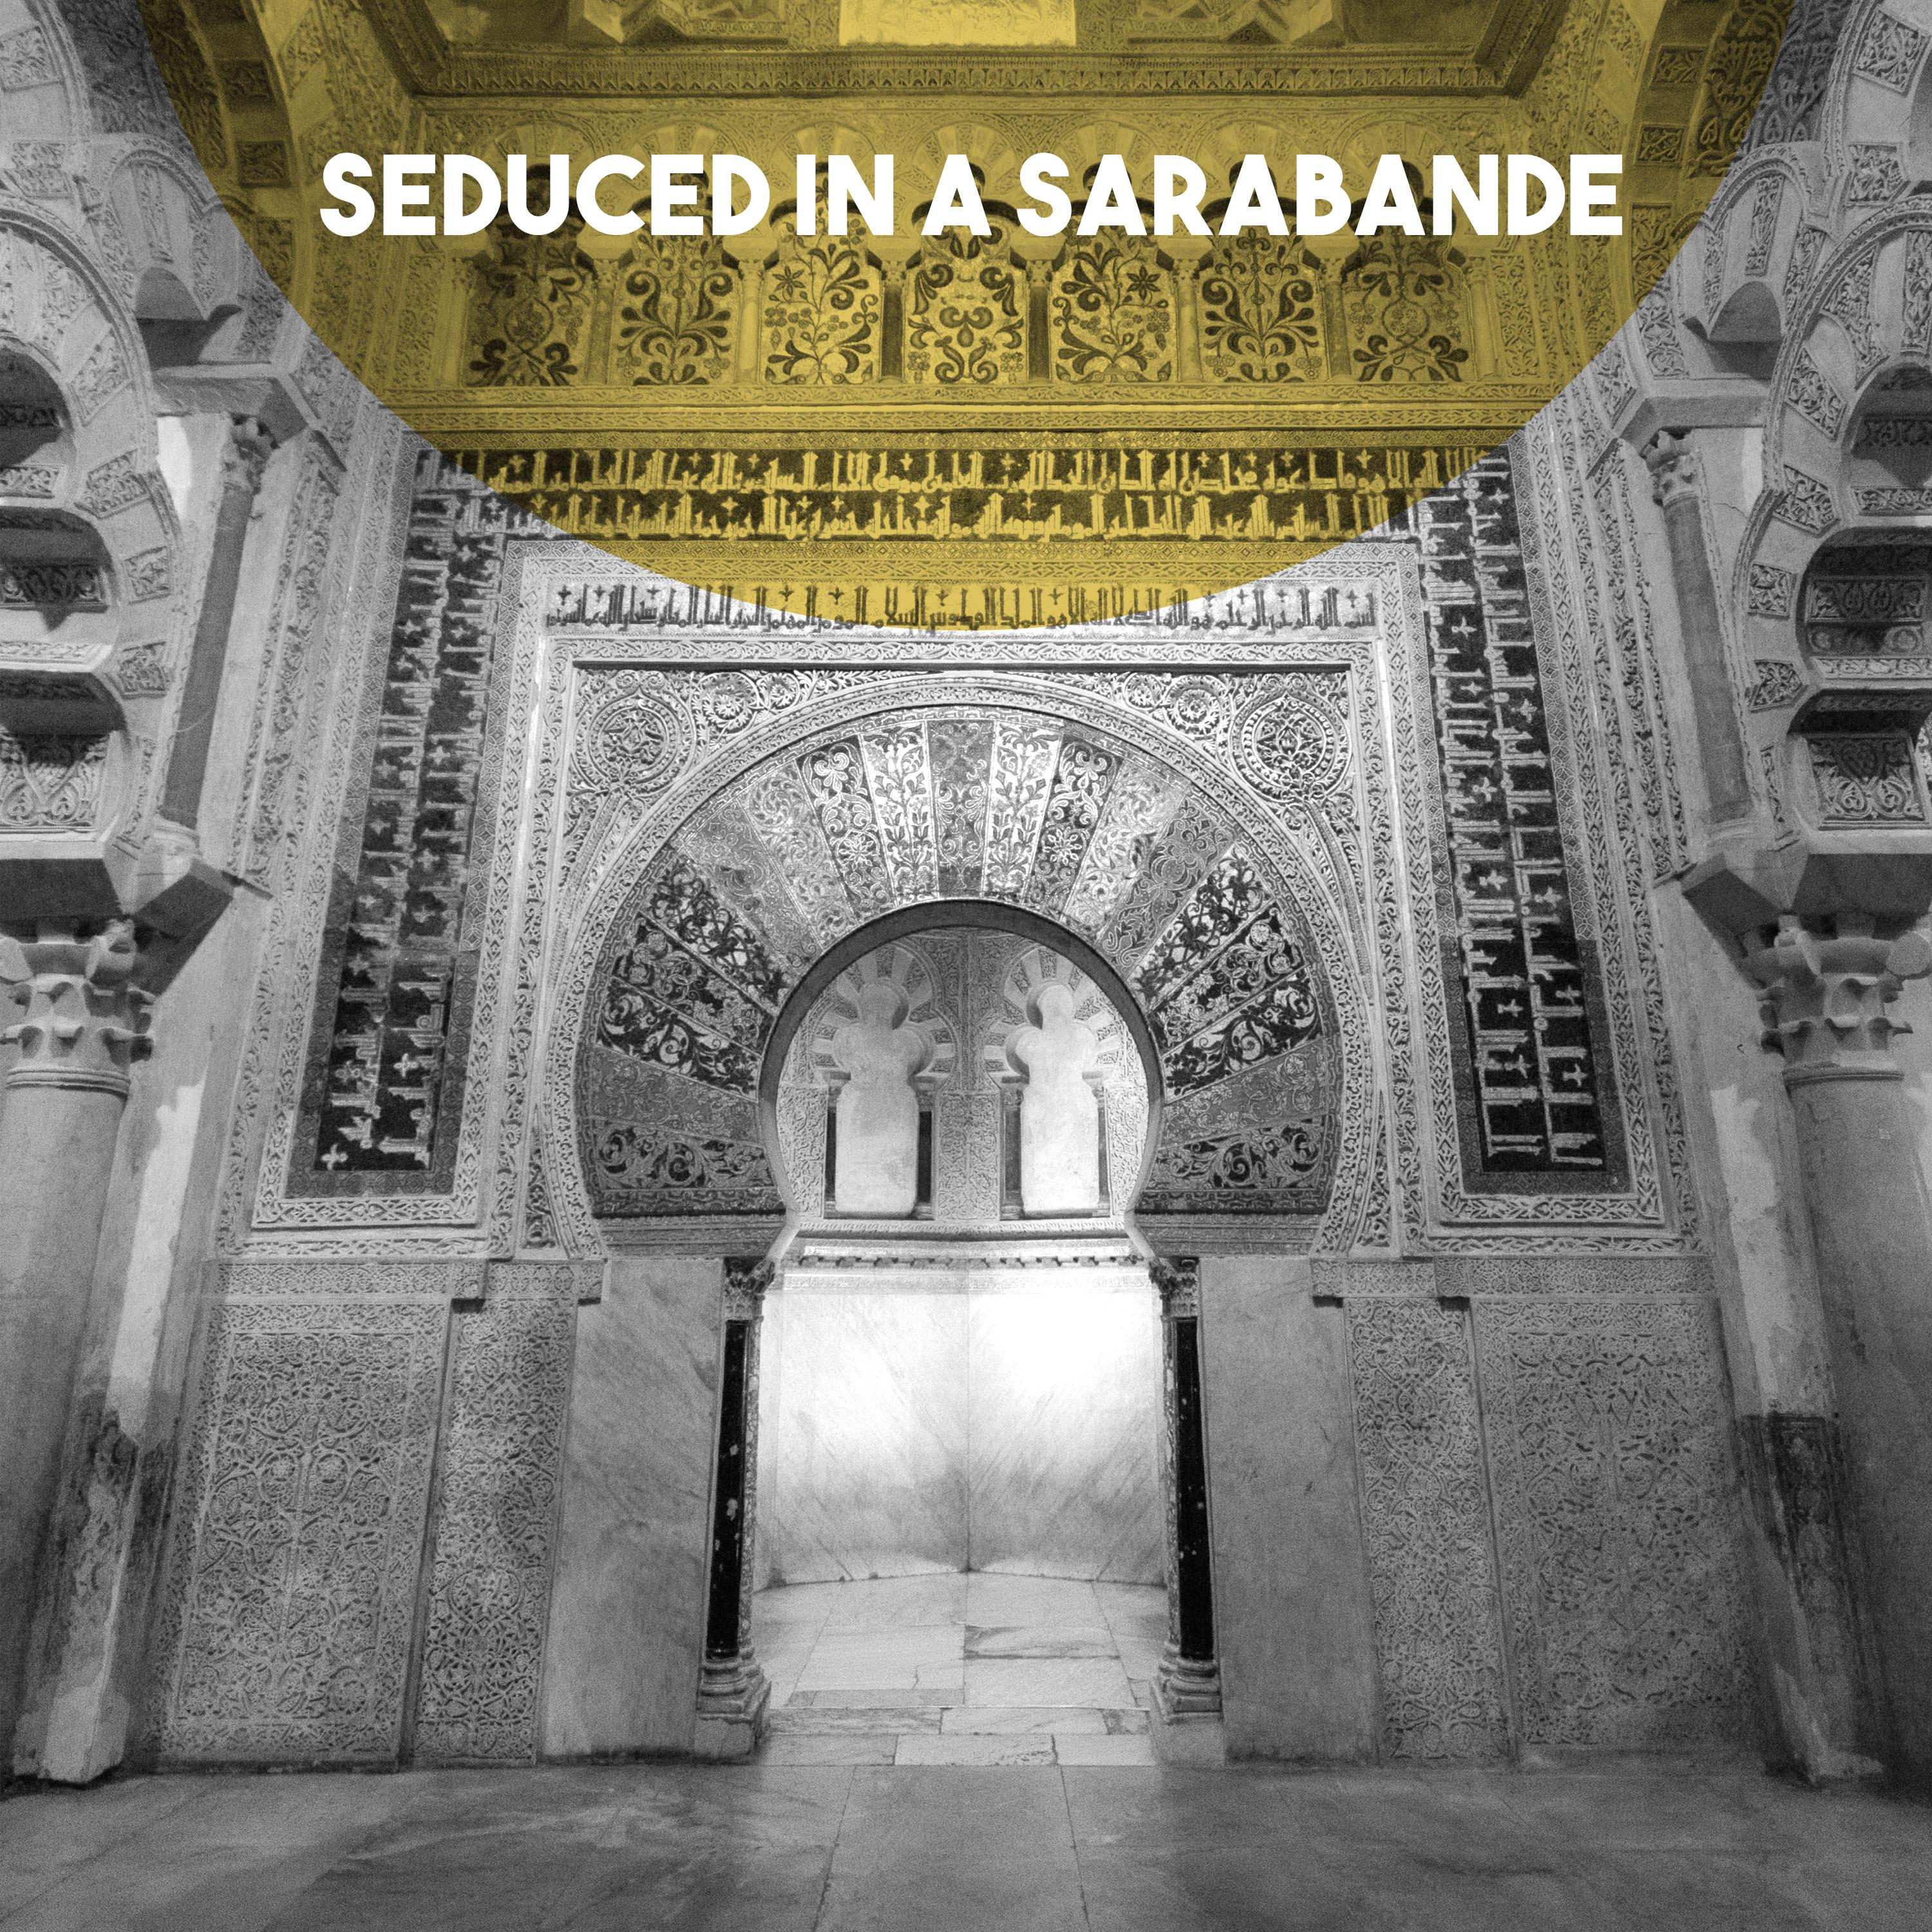 French Suite No. 1 in D Minor, BWV 812: III. Sarabande